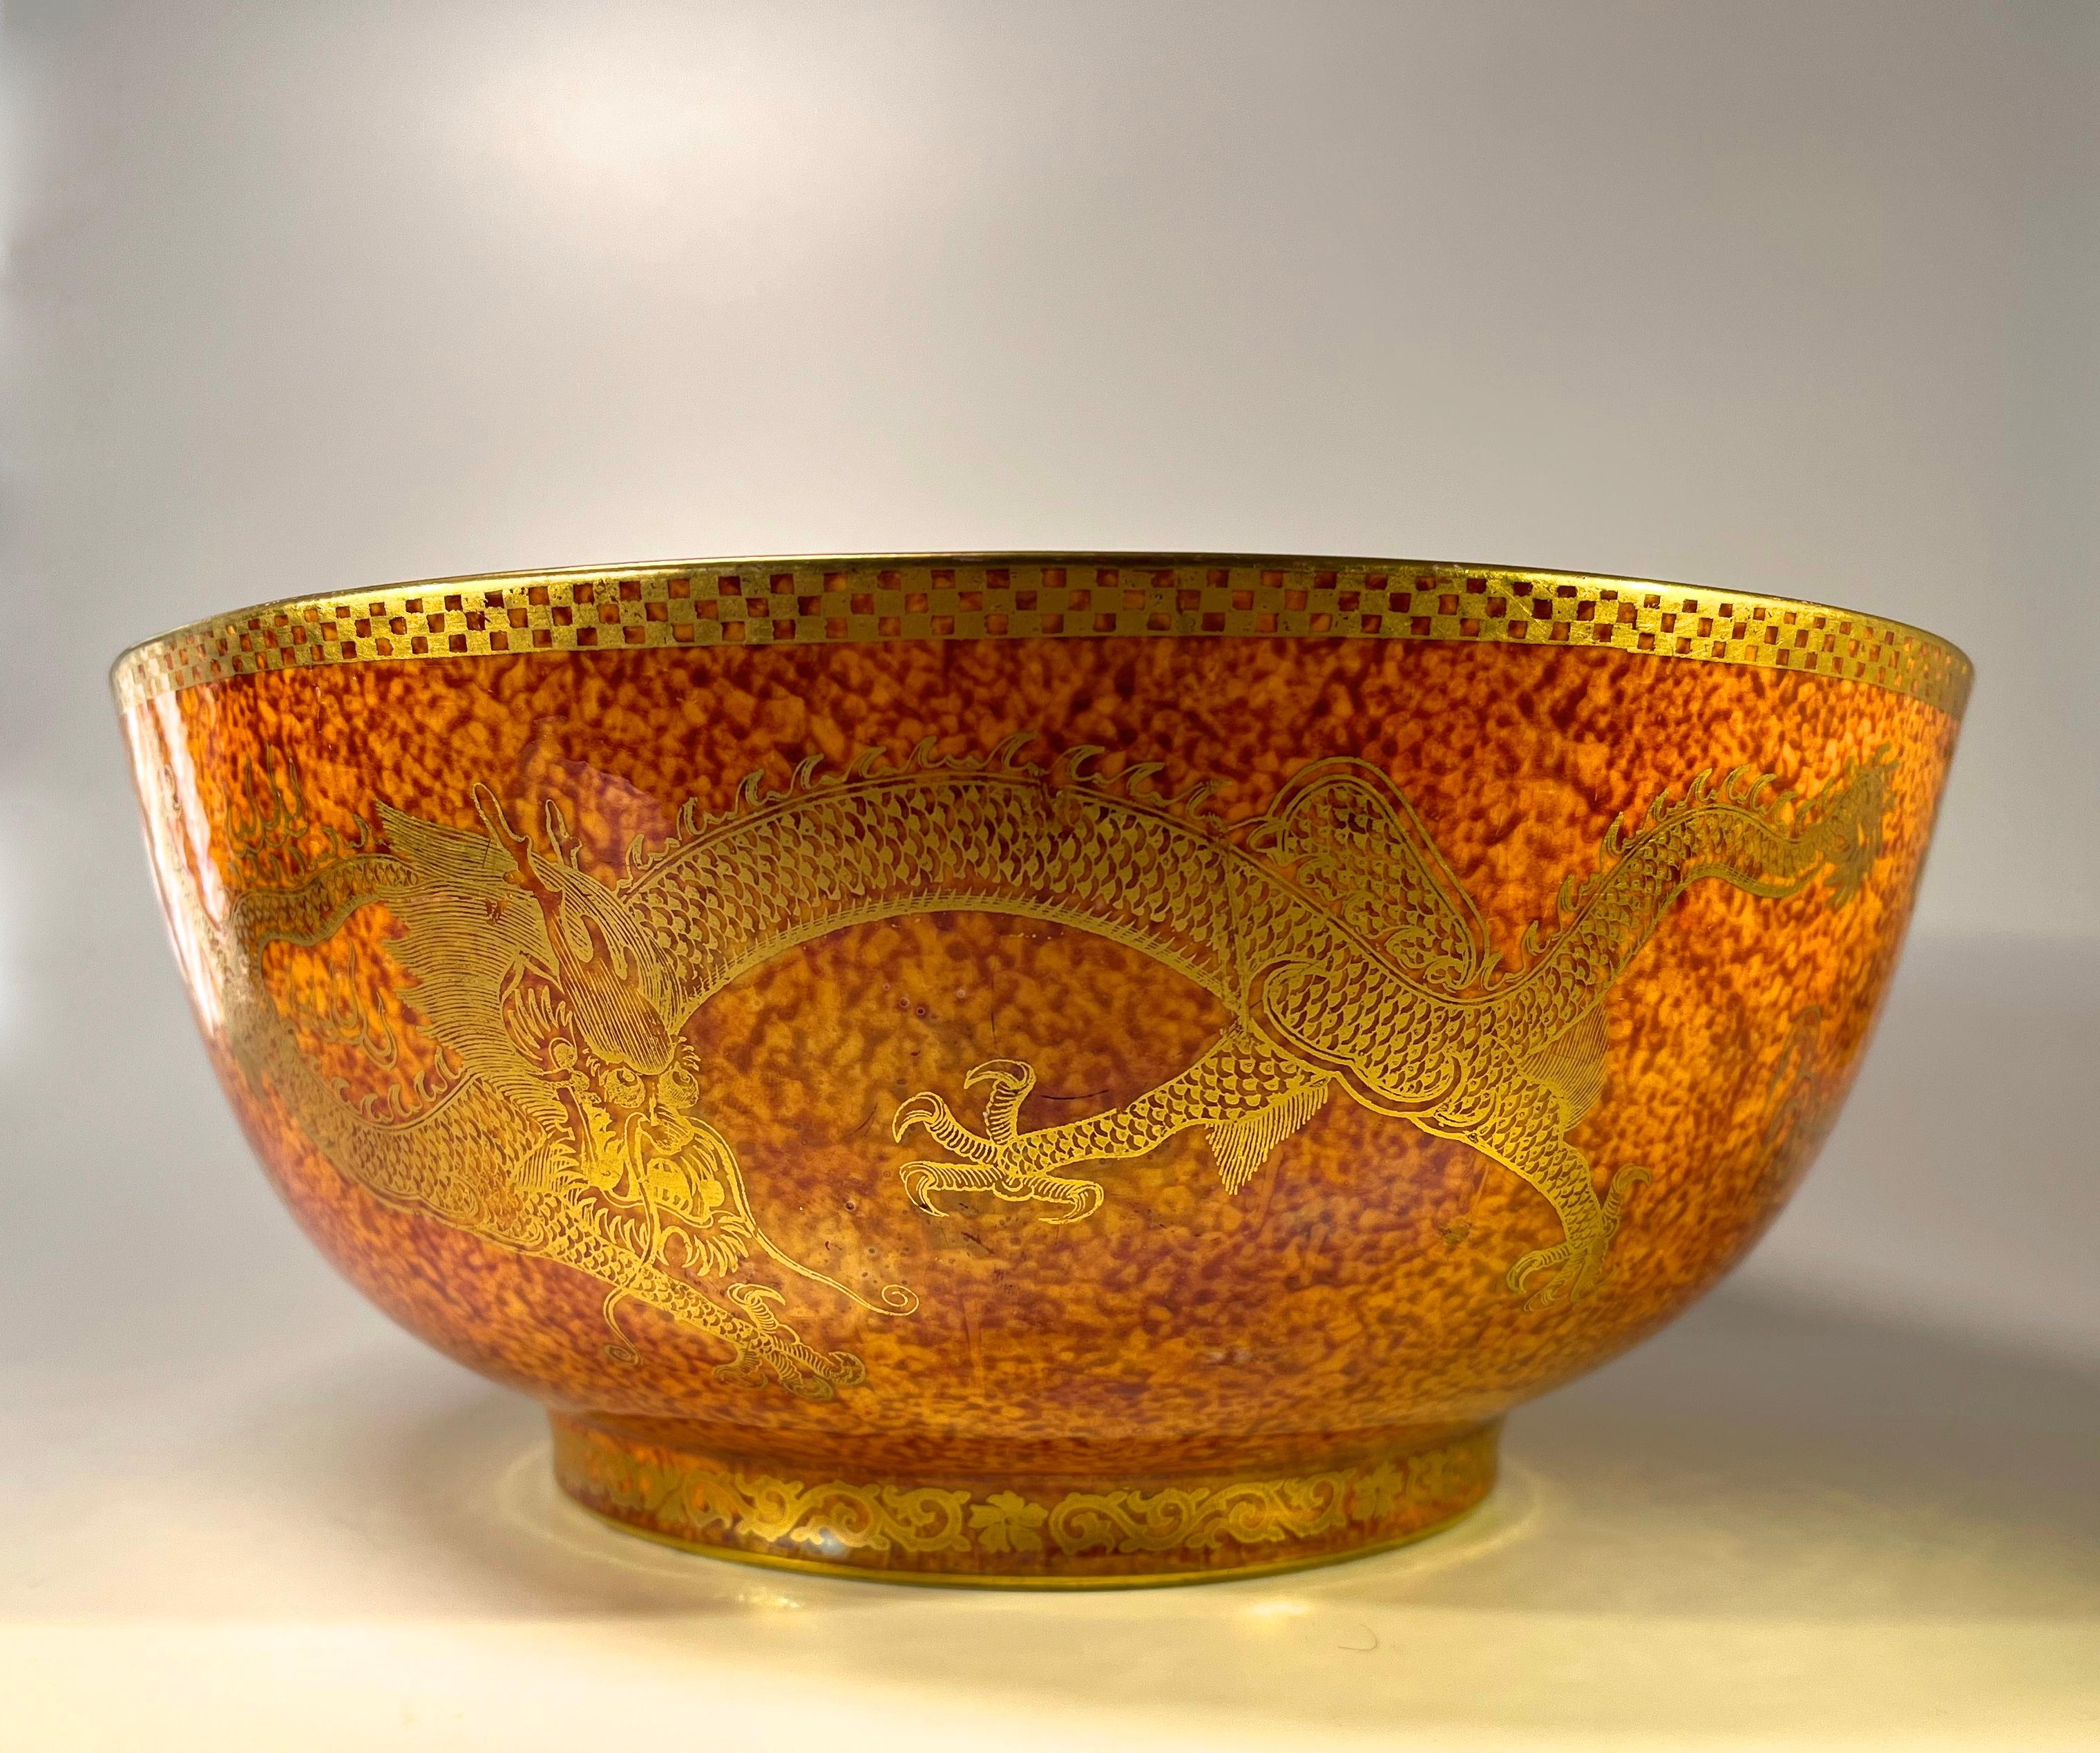 Daisy Makeig-Jones for Wedgwood, Fairyland Lustre substantial round bone china centrepiece bowl
The exterior is exquisitely adorned with animated gilded dragons on a rich copper orange mottled background. Gilded decorative edging to foot and